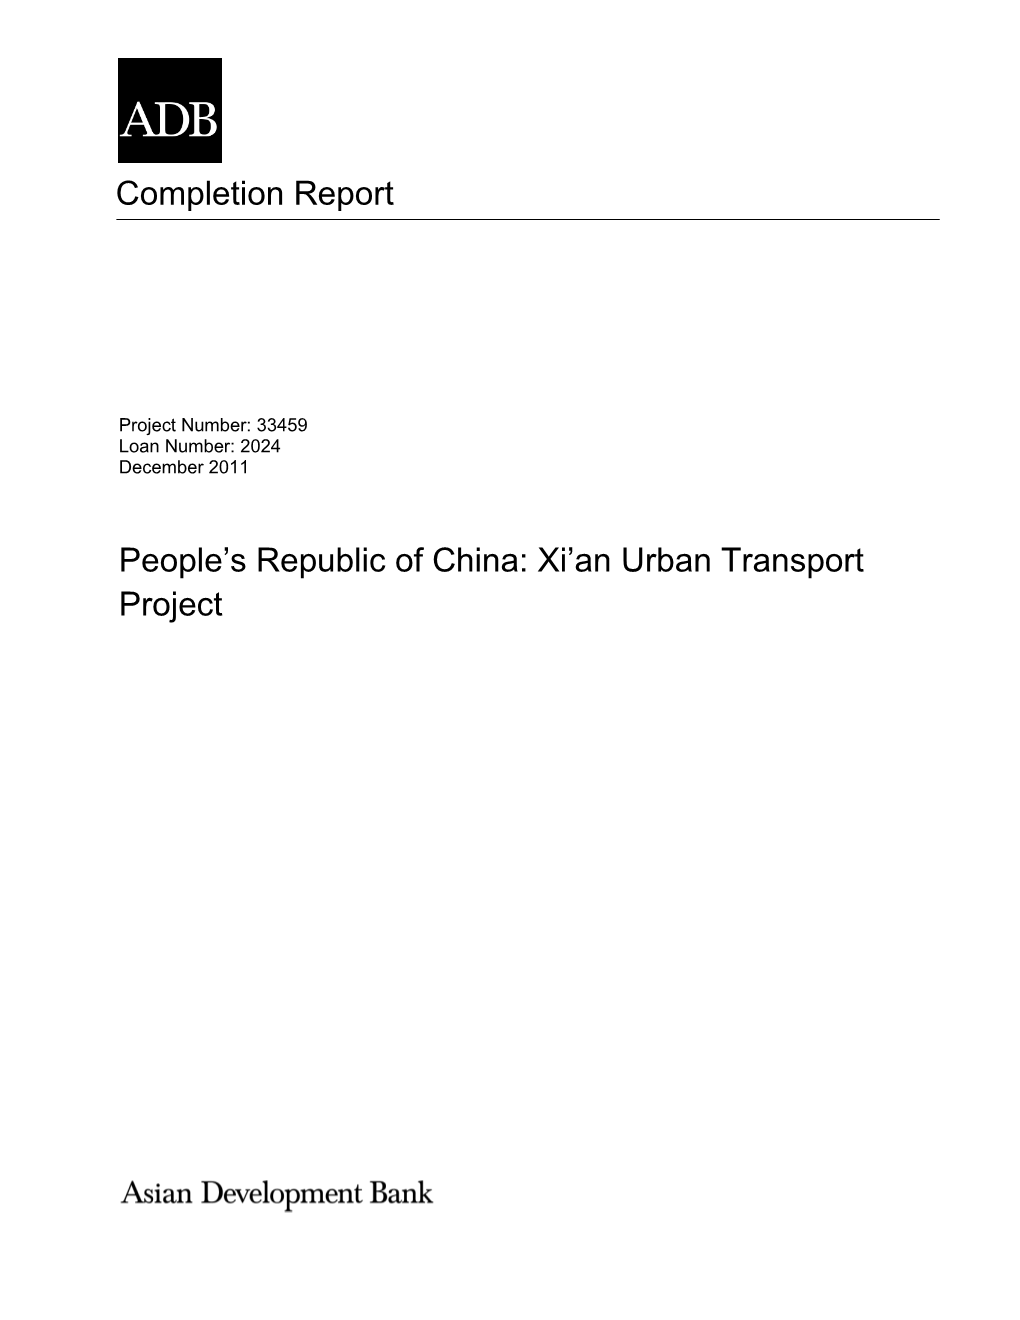 Xi'an Urban Transport Project— for the Third Ring Road (TRR) and Connector Roads—Would Result in the Loss of Land, Houses, Enterprises, Shops, and Other Assets